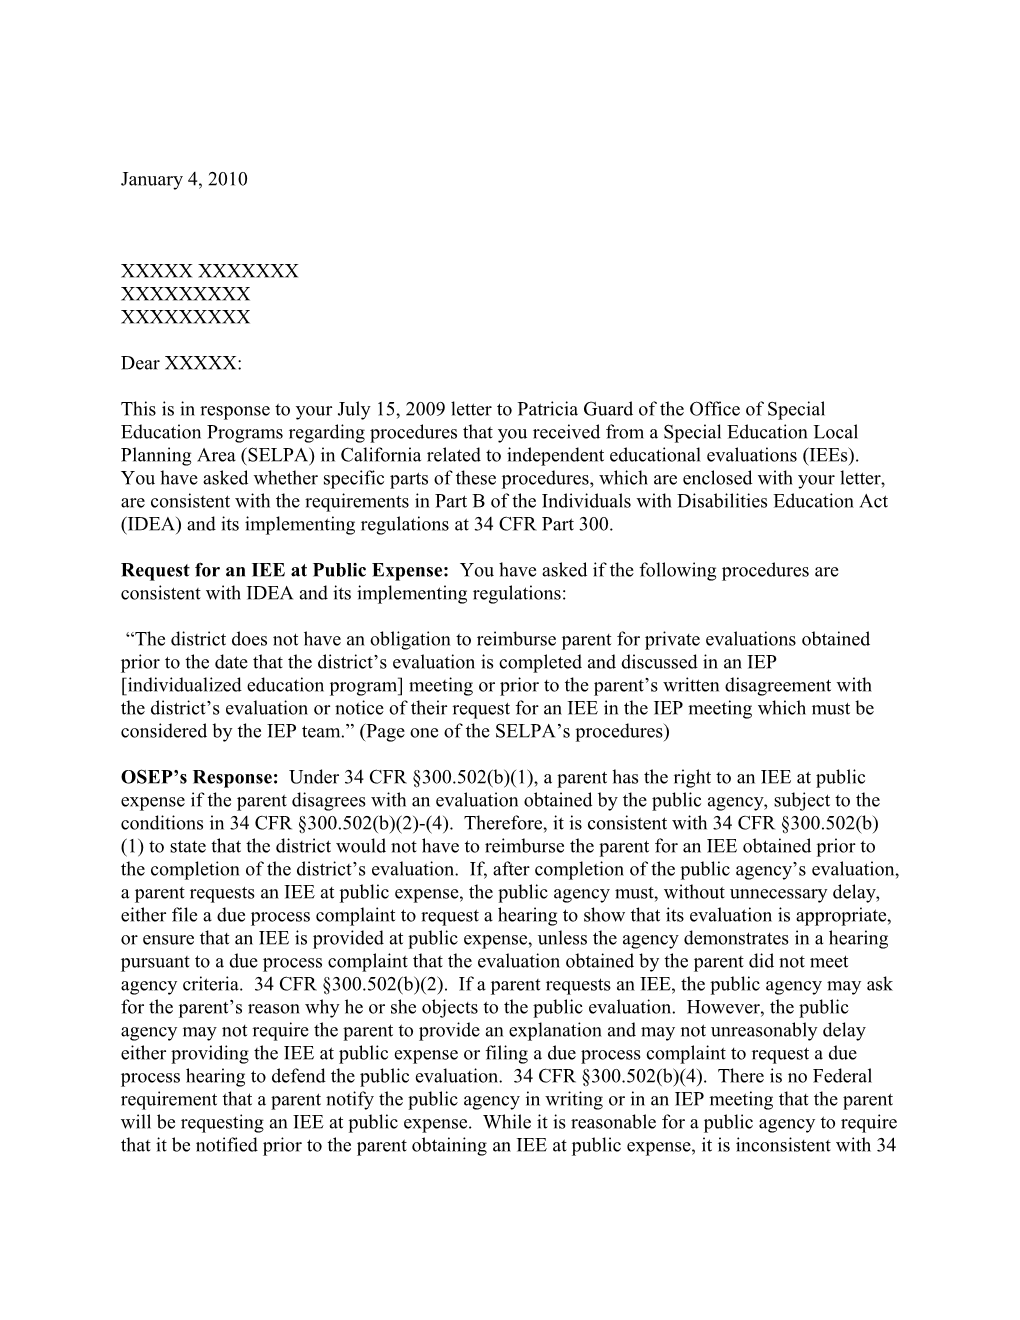 Redacted B Letter Dated 01/04/10 Re: Independent Educational Evaluations (MS Word)